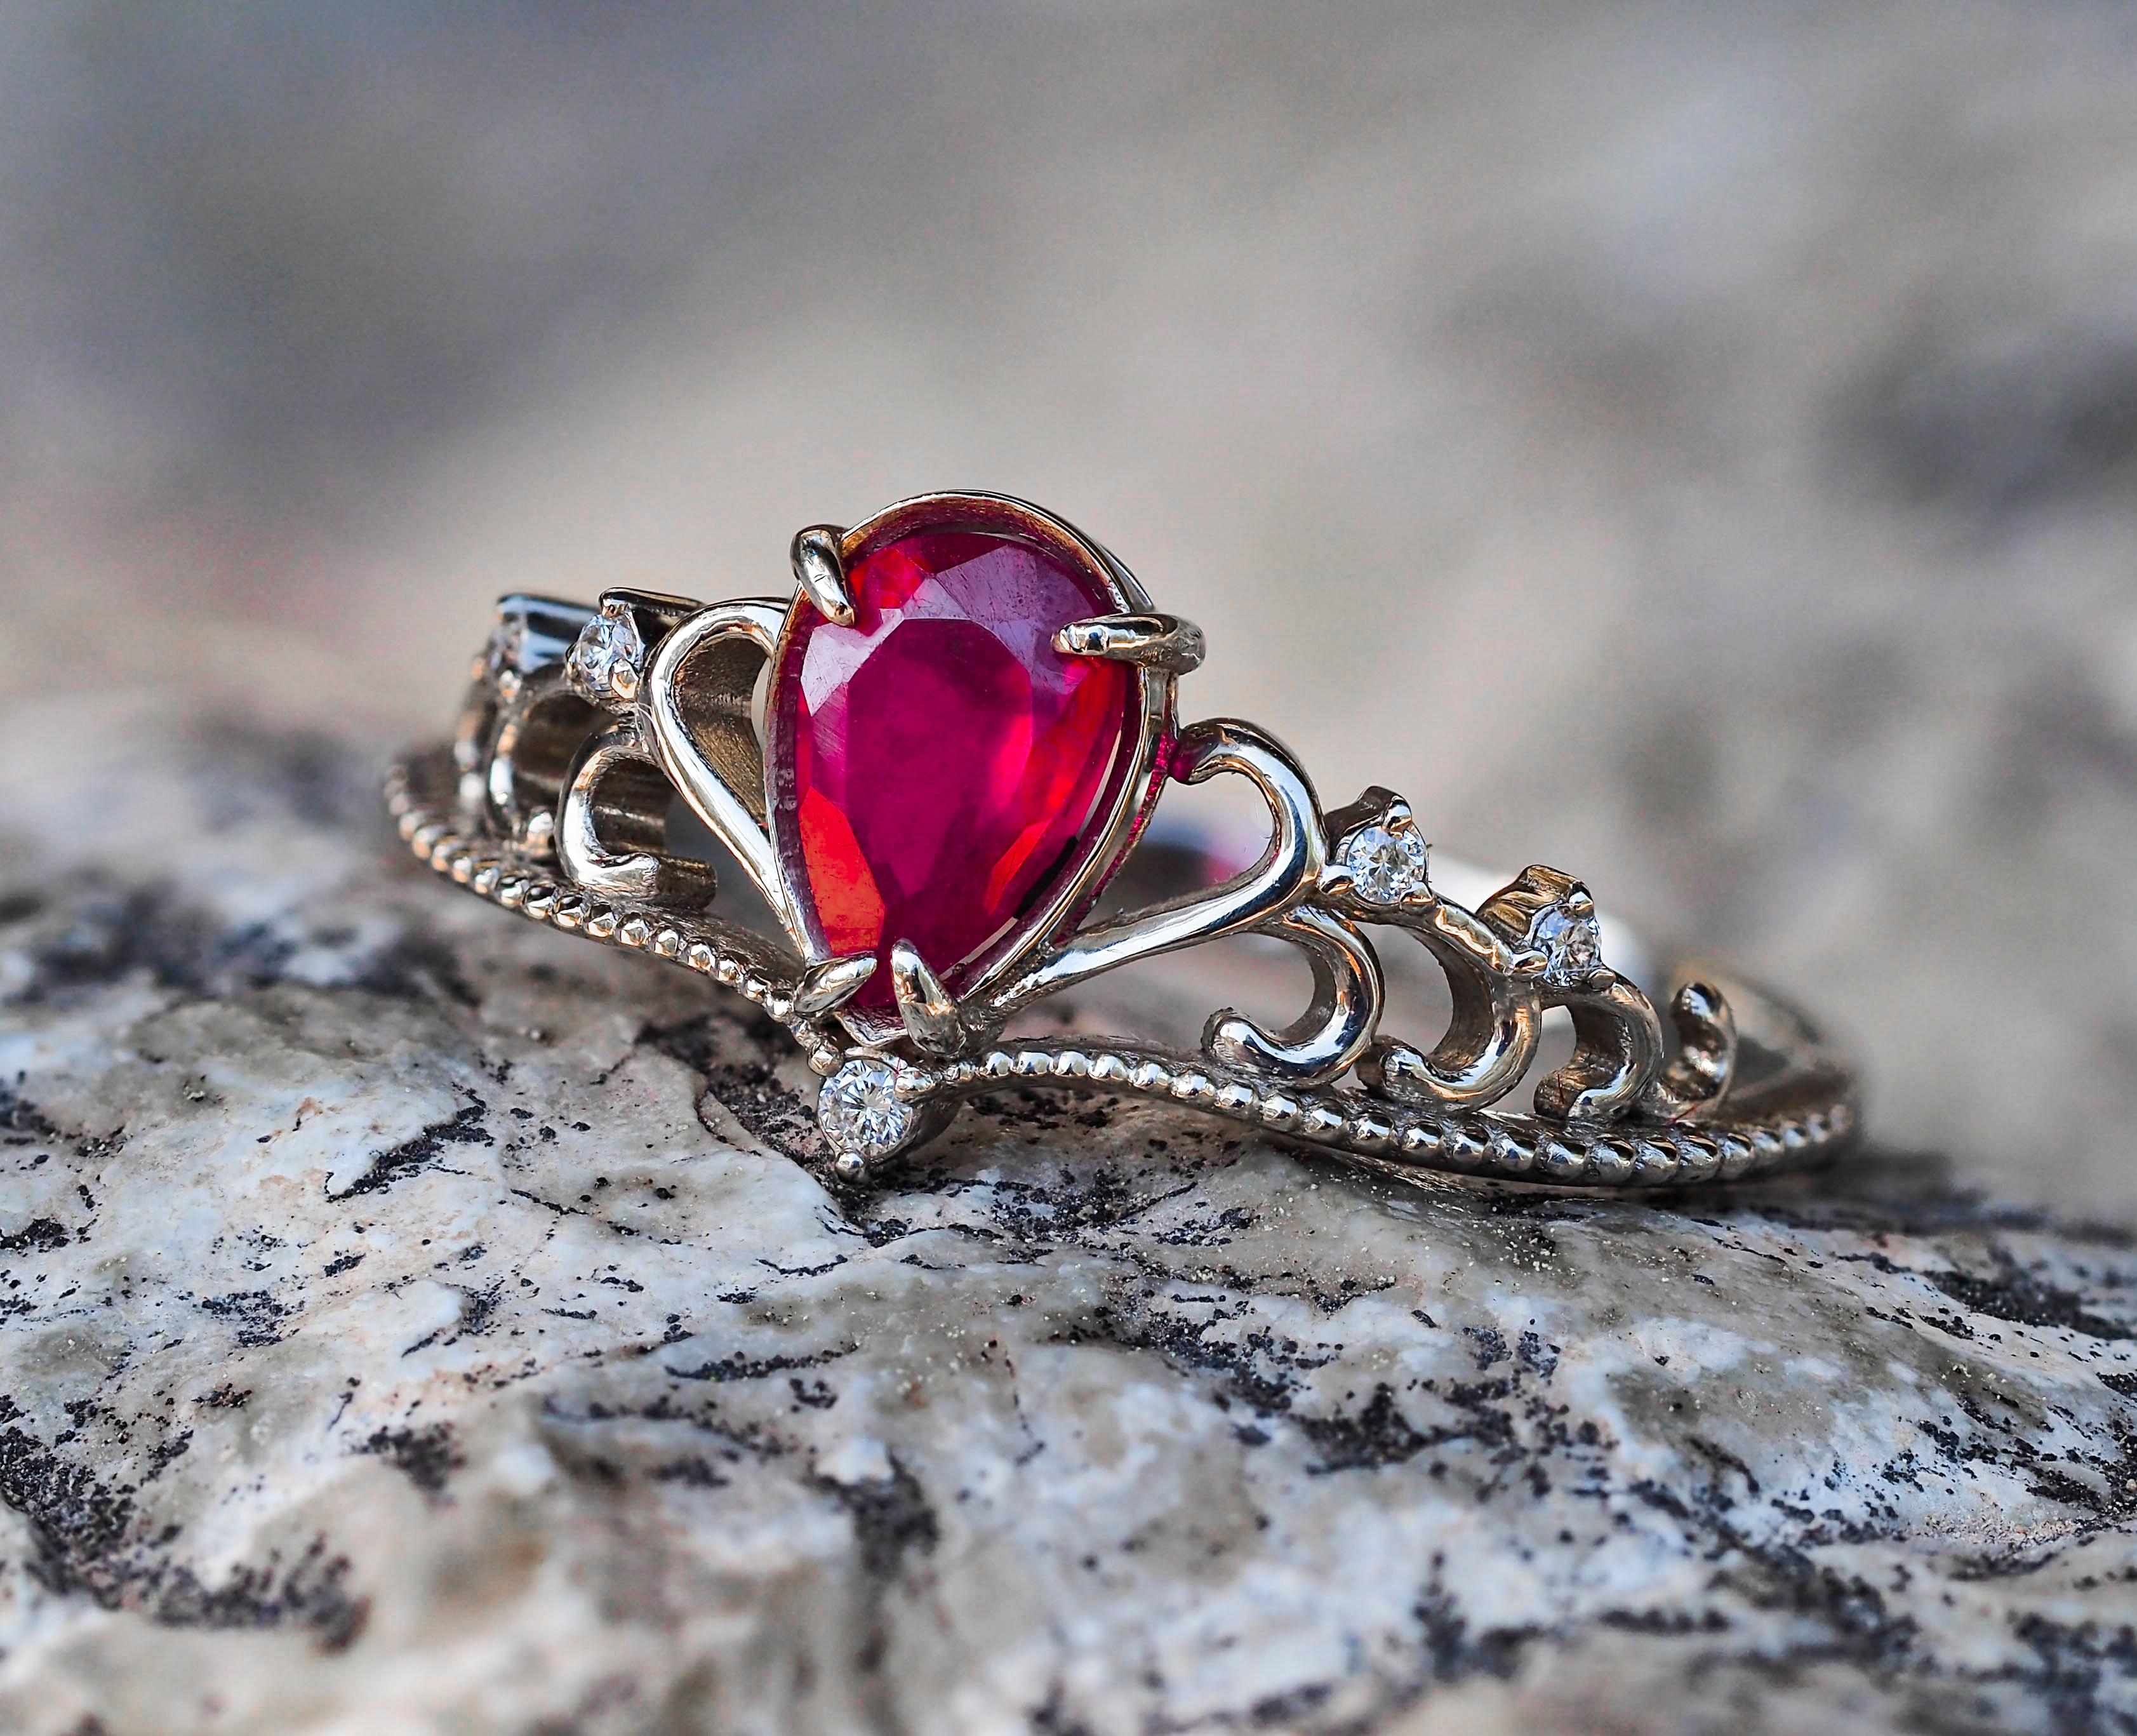 For Sale:  14 karat Gold Ring with Ruby and Diamonds, Tiara Ring. July birthstone ring 2